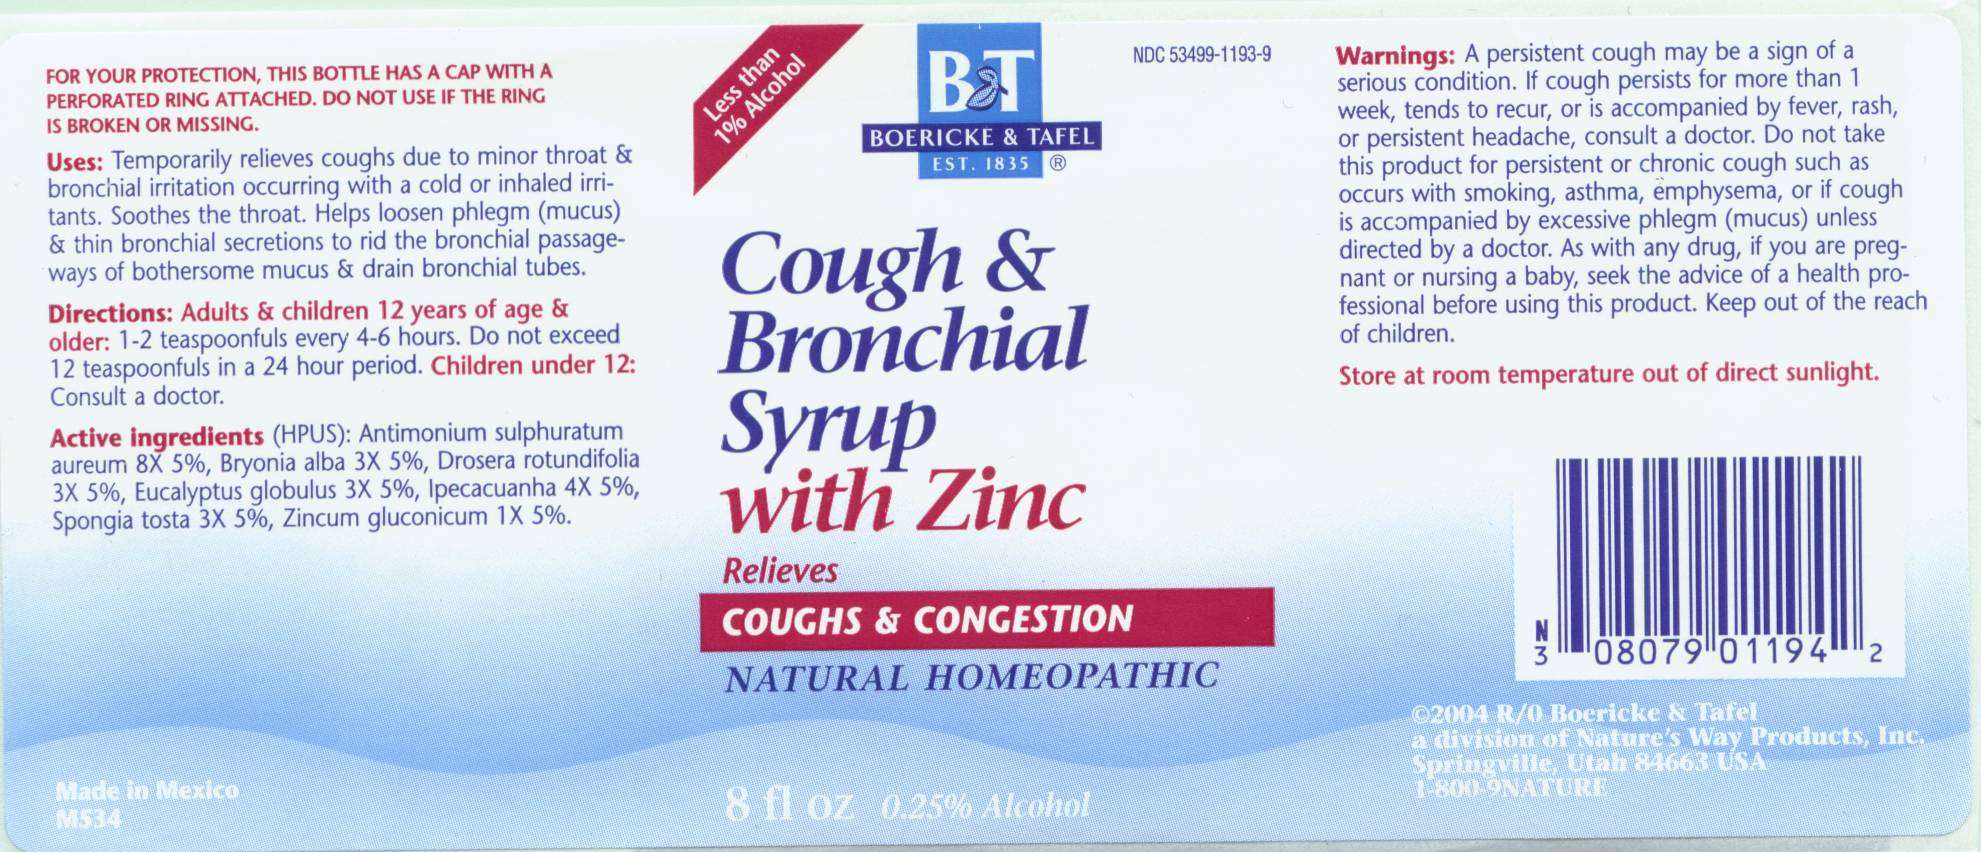 Cough and Bronchial with Zinc